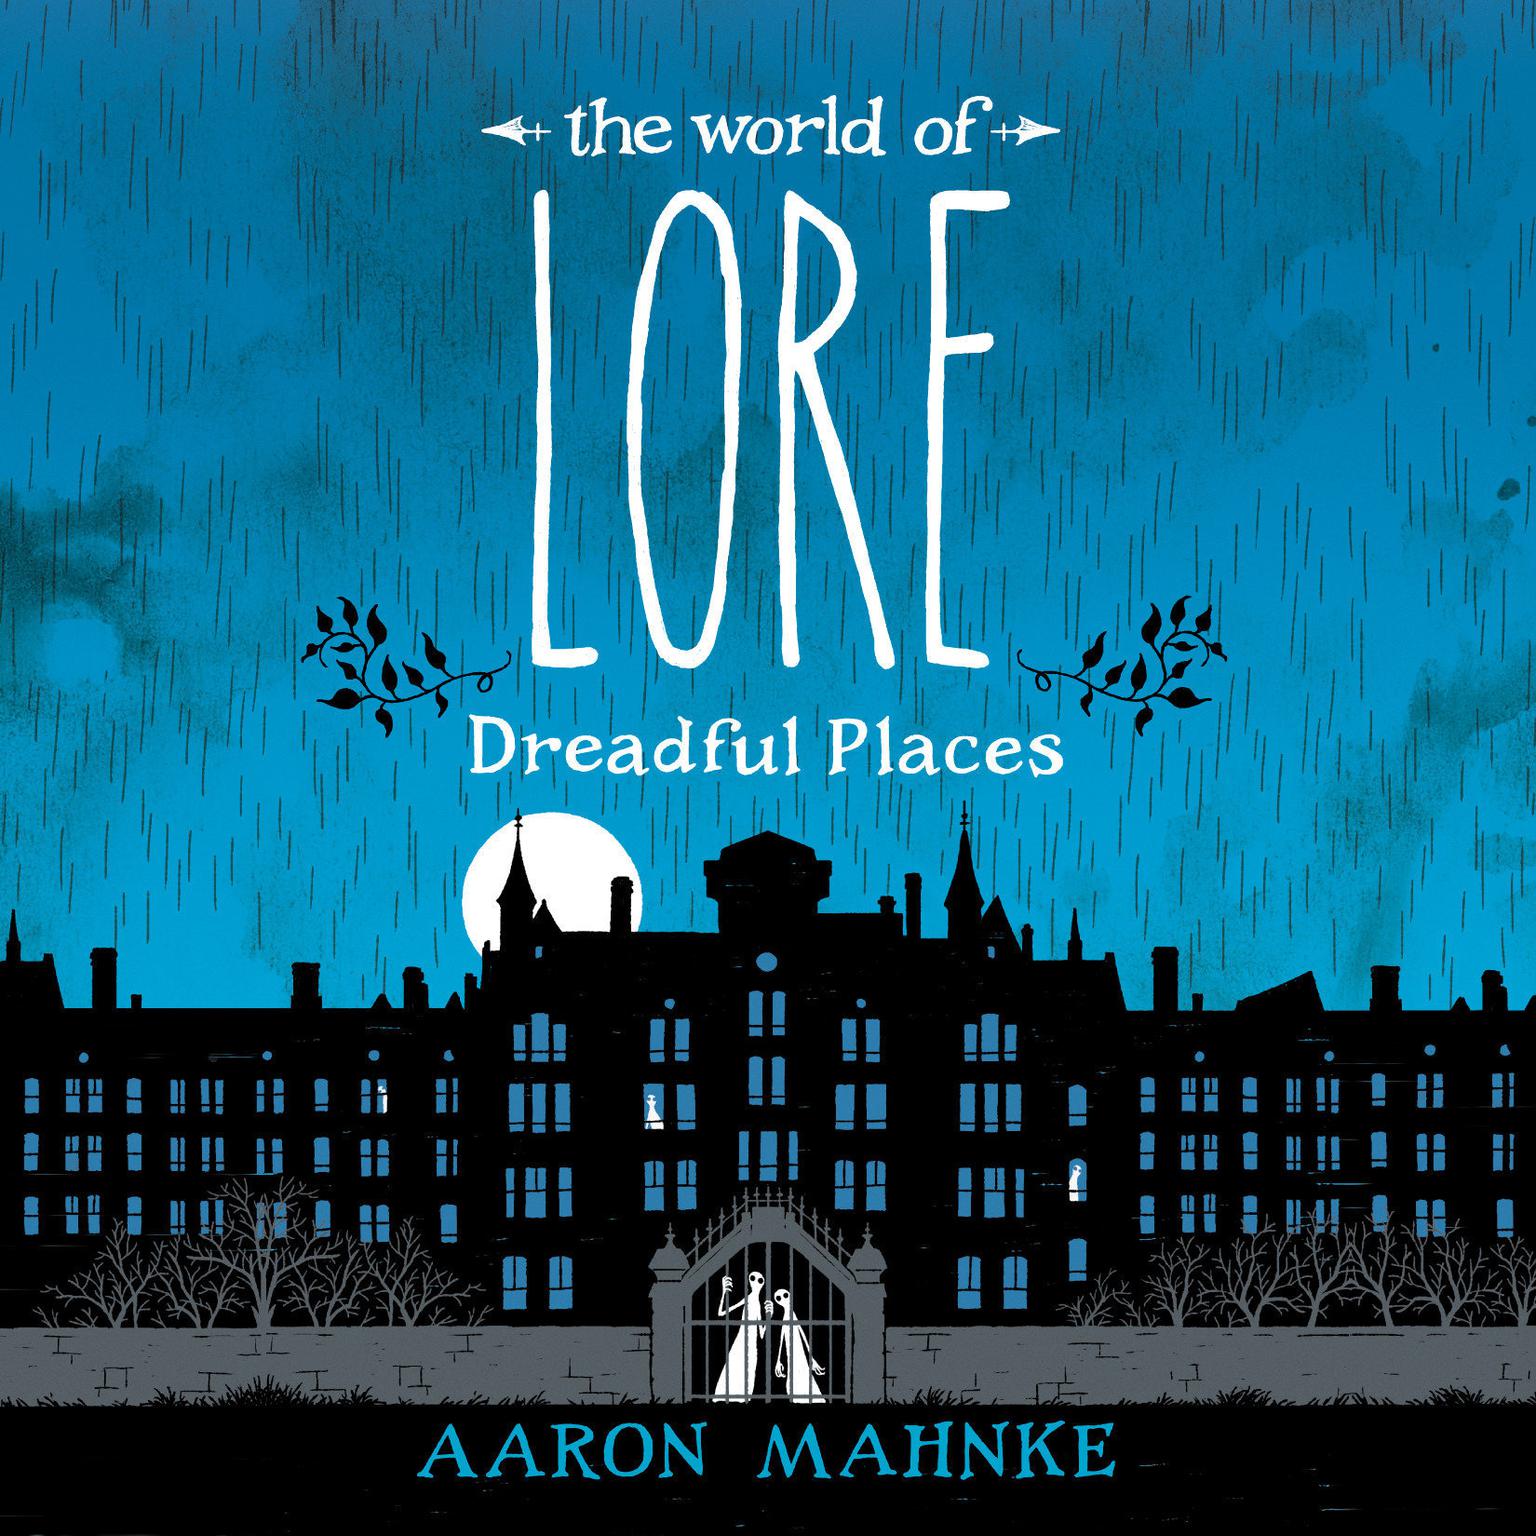 The World of Lore: Dreadful Places: Dreadful Places Audiobook, by Aaron Mahnke